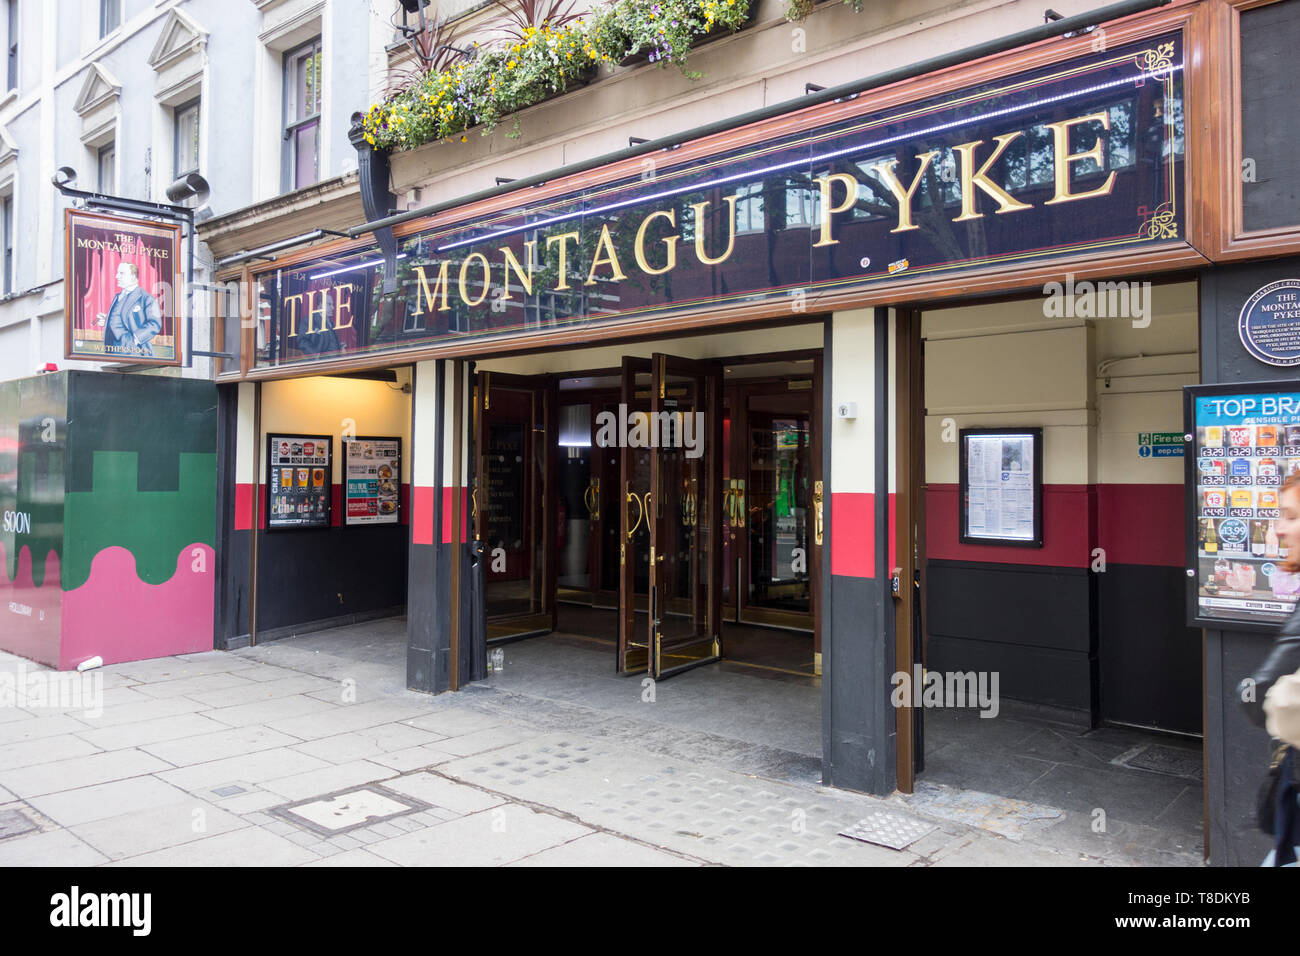 The Montague Pyke public House, a pub belonging to Wetherspoons chain, on Charing Cross Road, Soho, London, WC2, UK Stock Photo